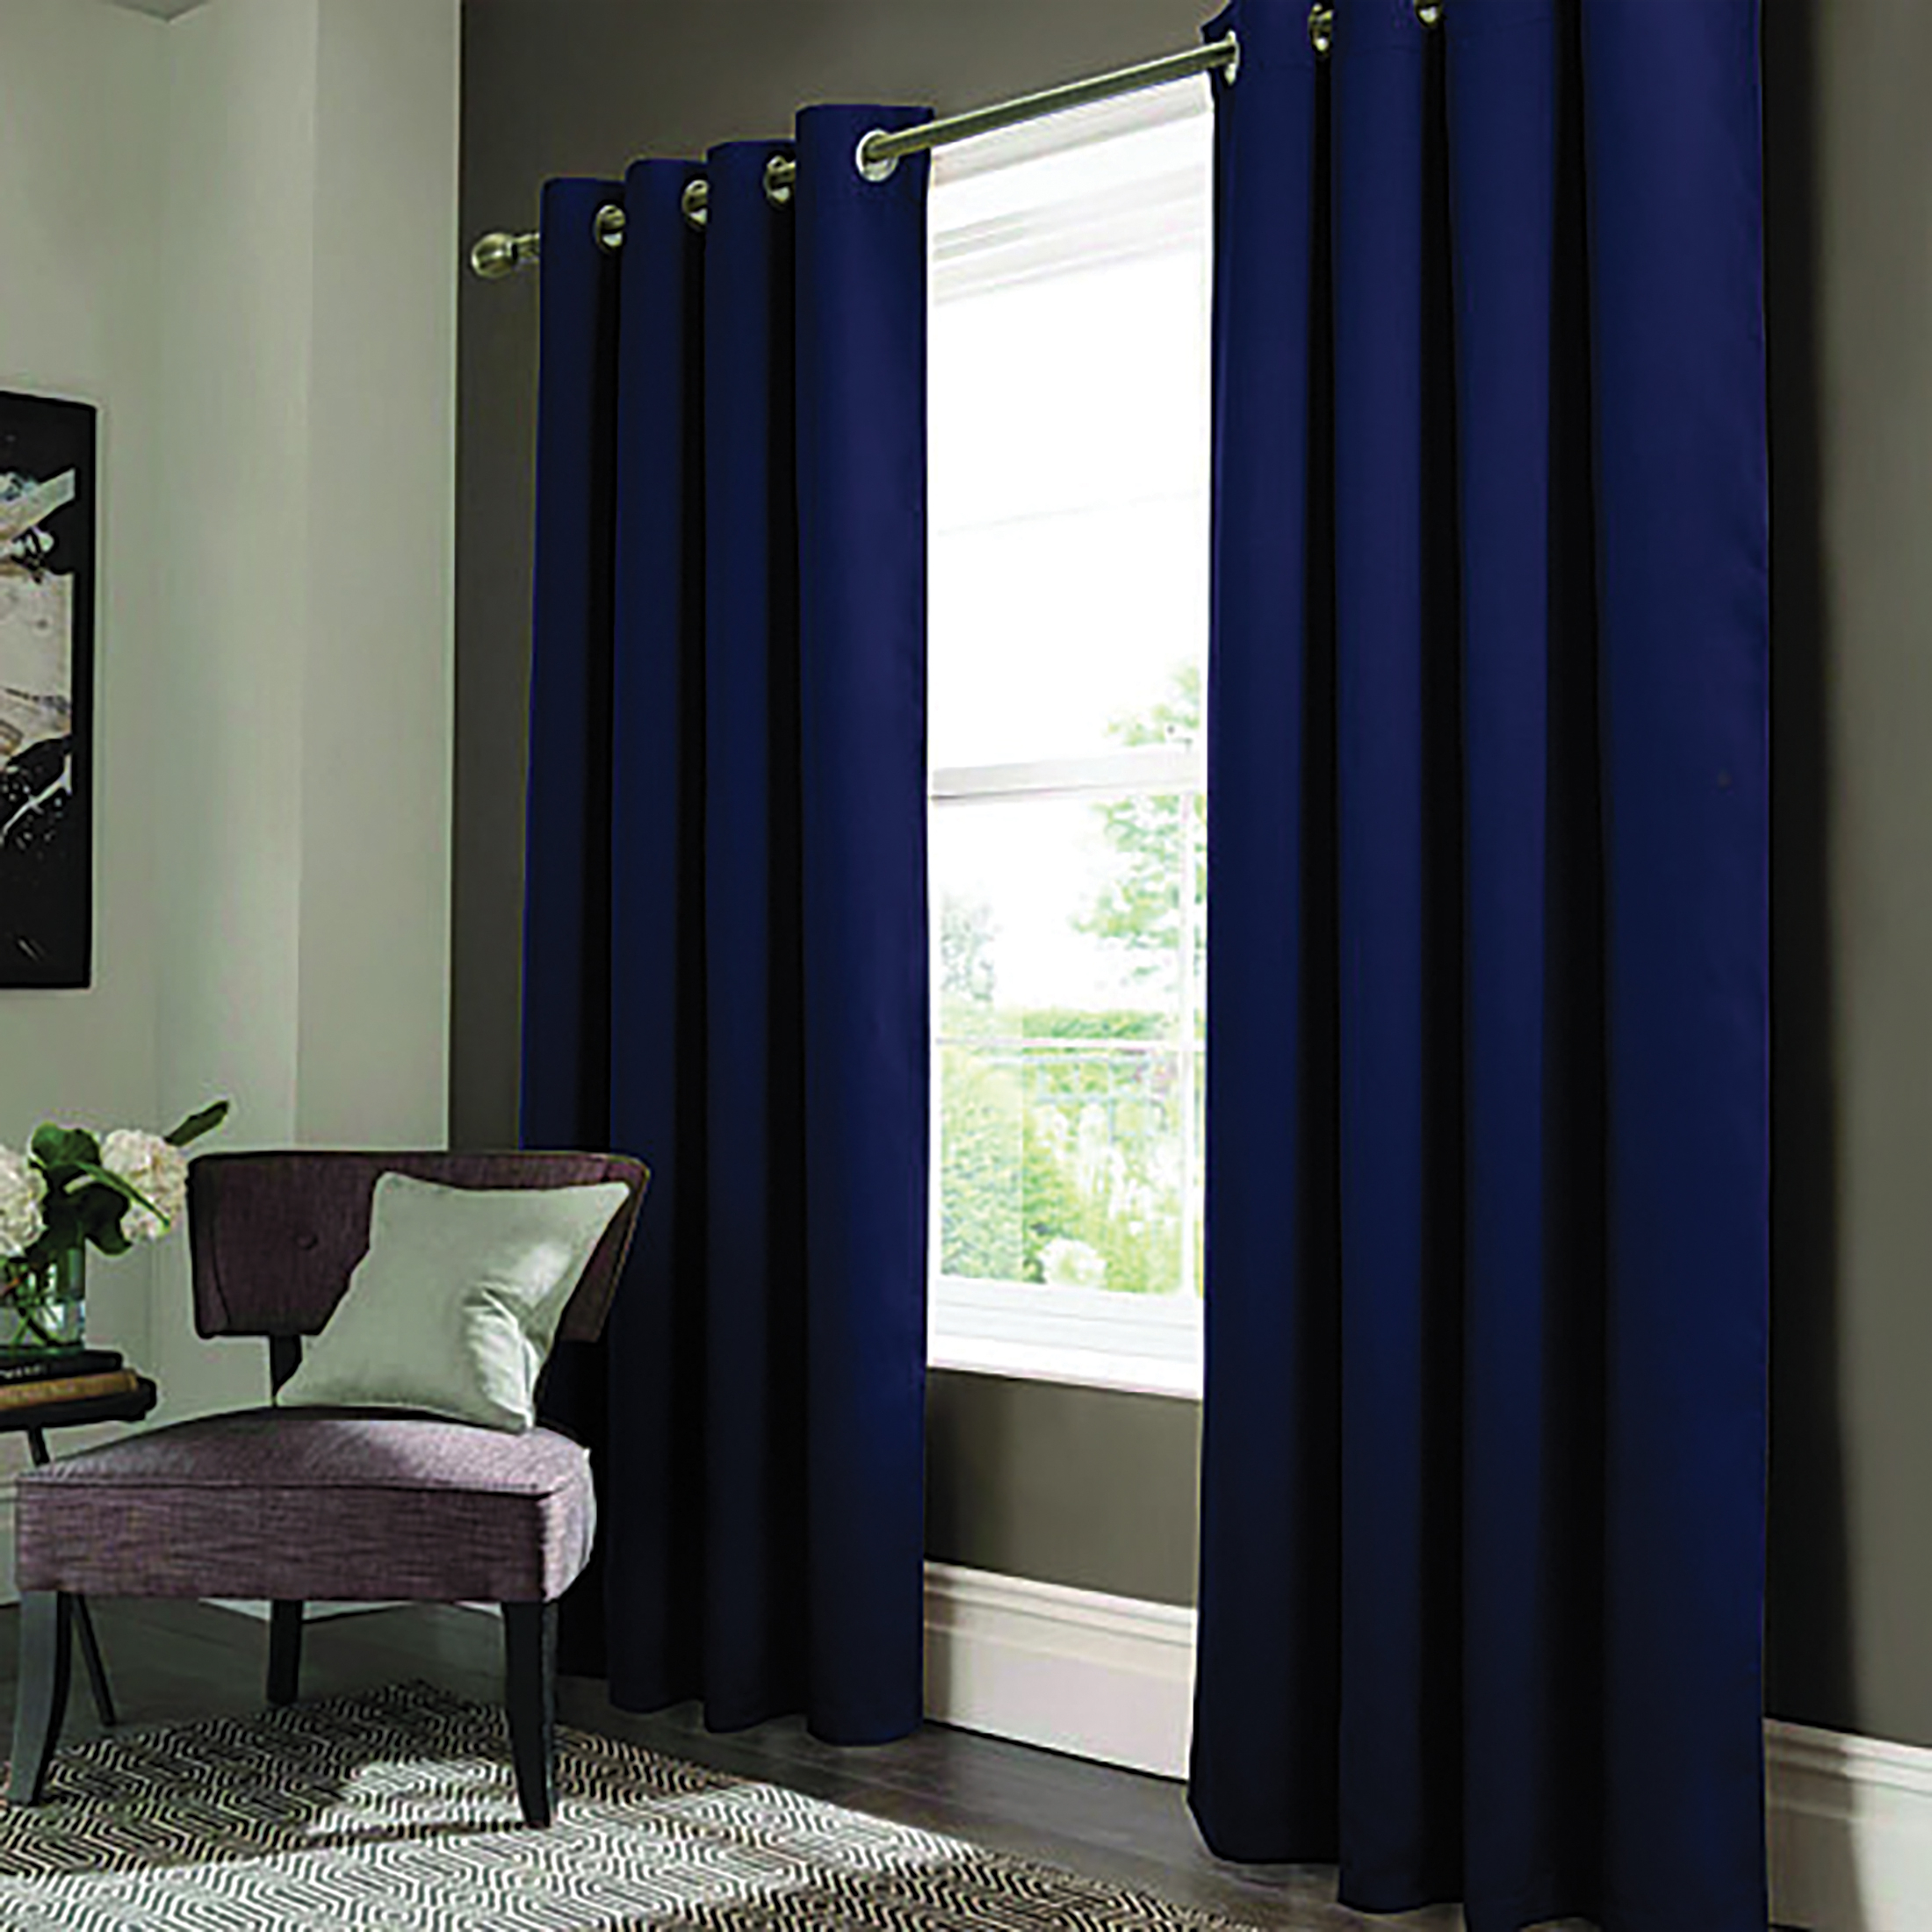 2-Panel Anchorage Thermal Insulated Blackout Grommet Window Drapes Curtain Panel Pair 84 - Navy Blue